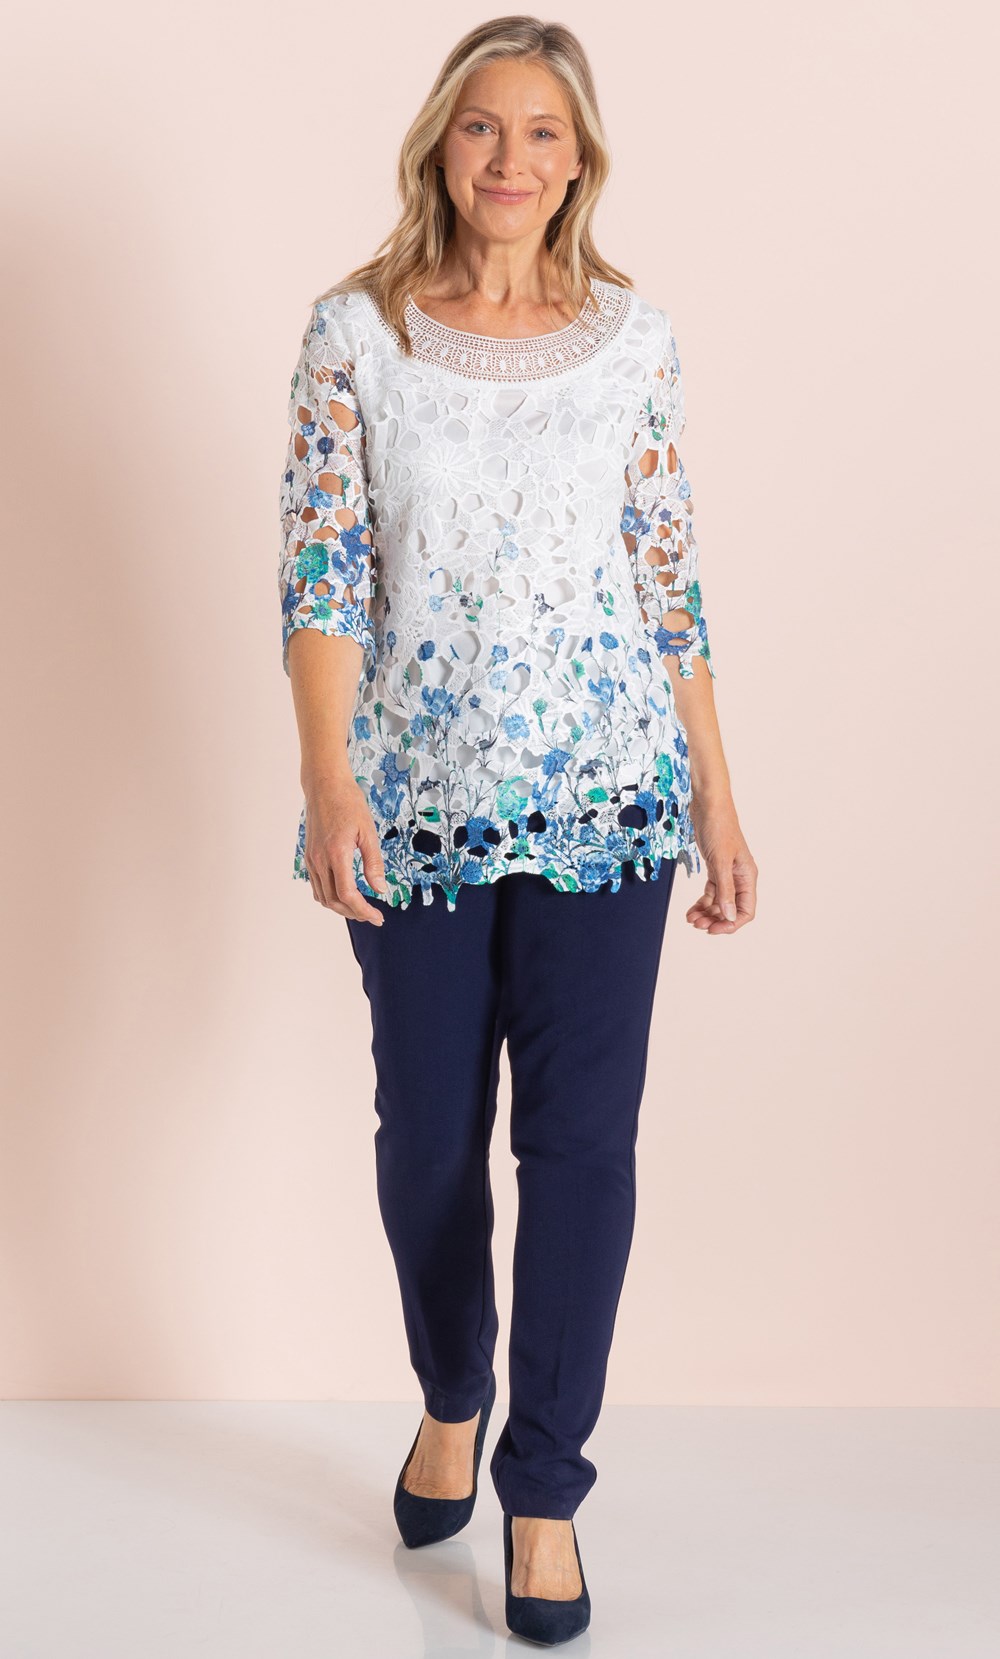 Anna Rose Printed Lace Top